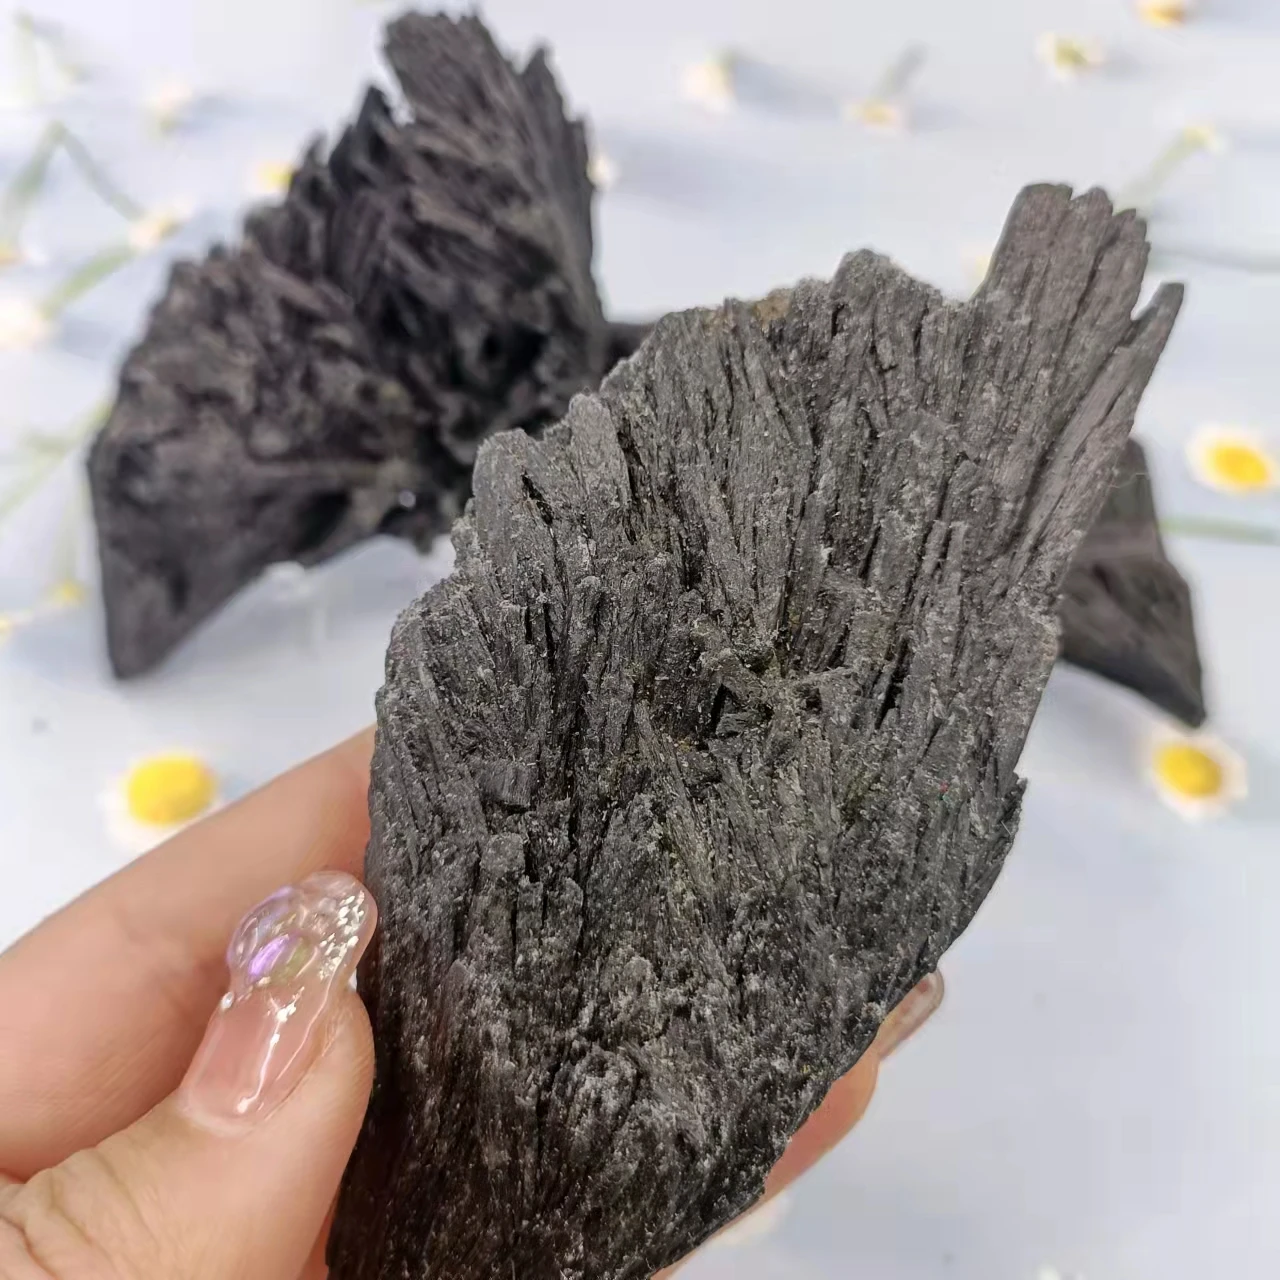 Beautiful Natural Sector Black Tourmaline Rock Crystal Quartz Energy Mineral Stone Home Decoration Office Accessories